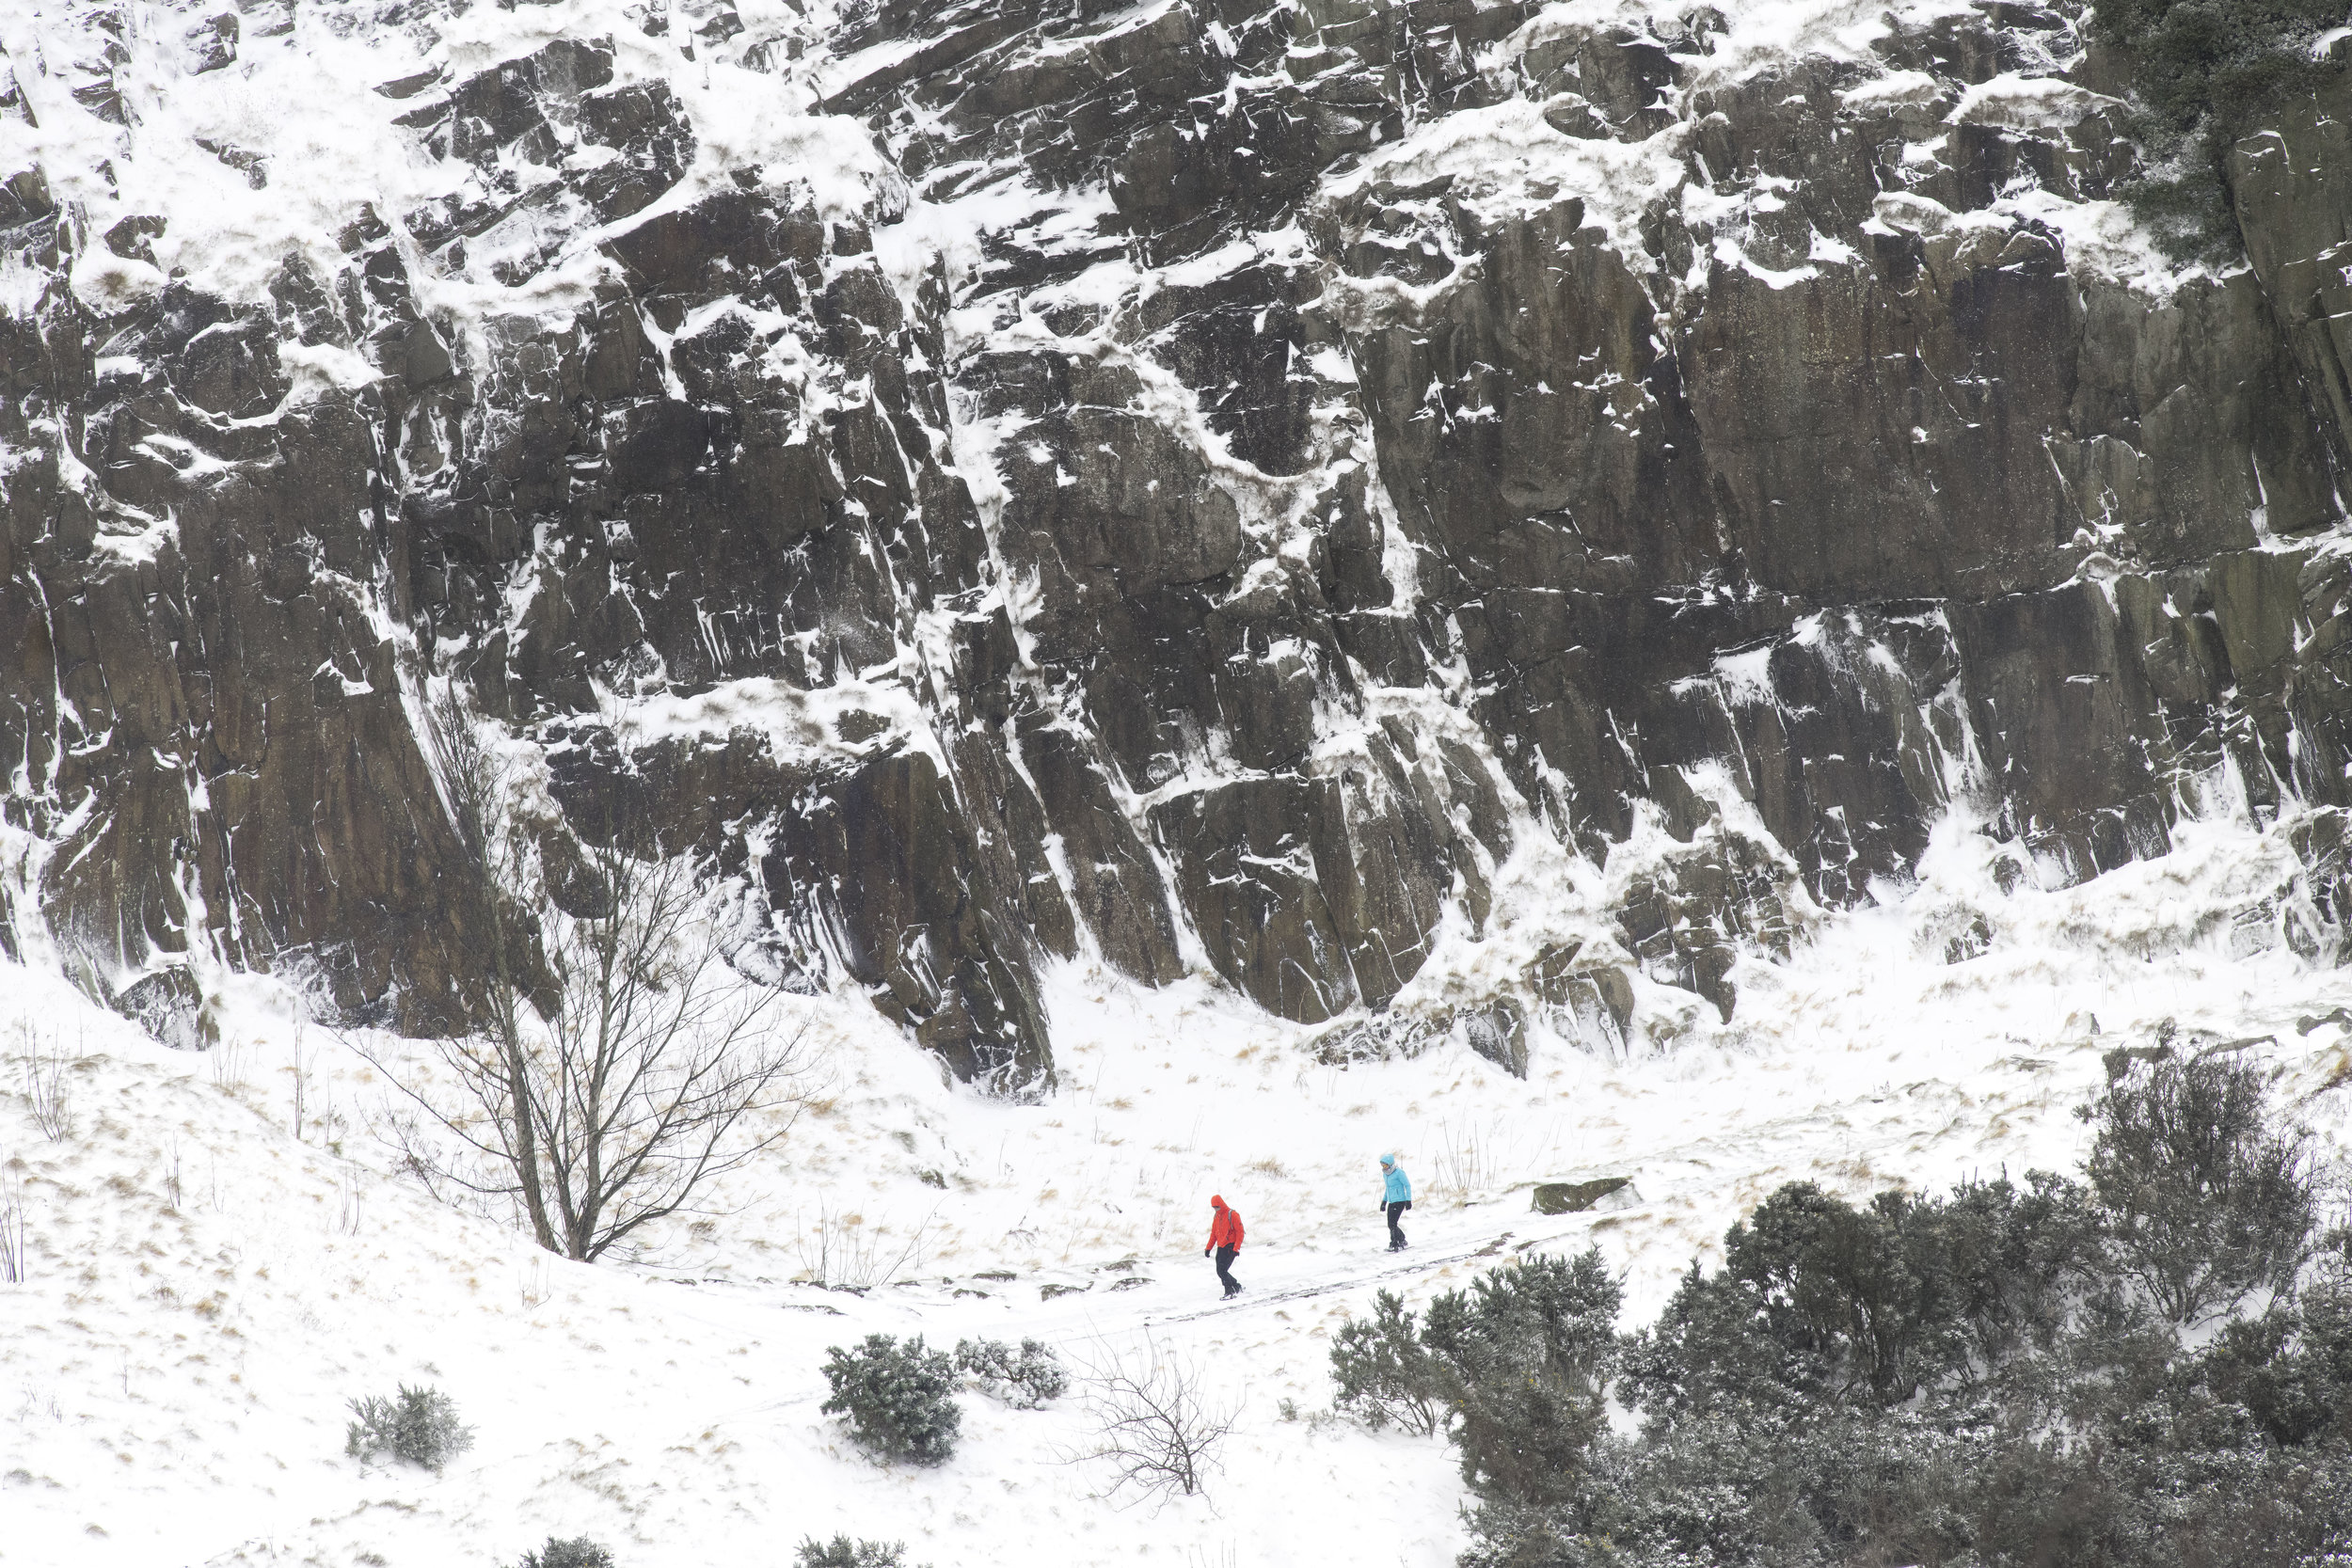  EDINBURGH, SCOTLAND - MARCH 1: Walkers seen in Holyrood Park, home of Arthur's Seat, on March 1, 2018 in Edinburgh, United Kingdom. People have been warned not to make unnecessary journeys as the Met office issues a red weather be aware warning for 